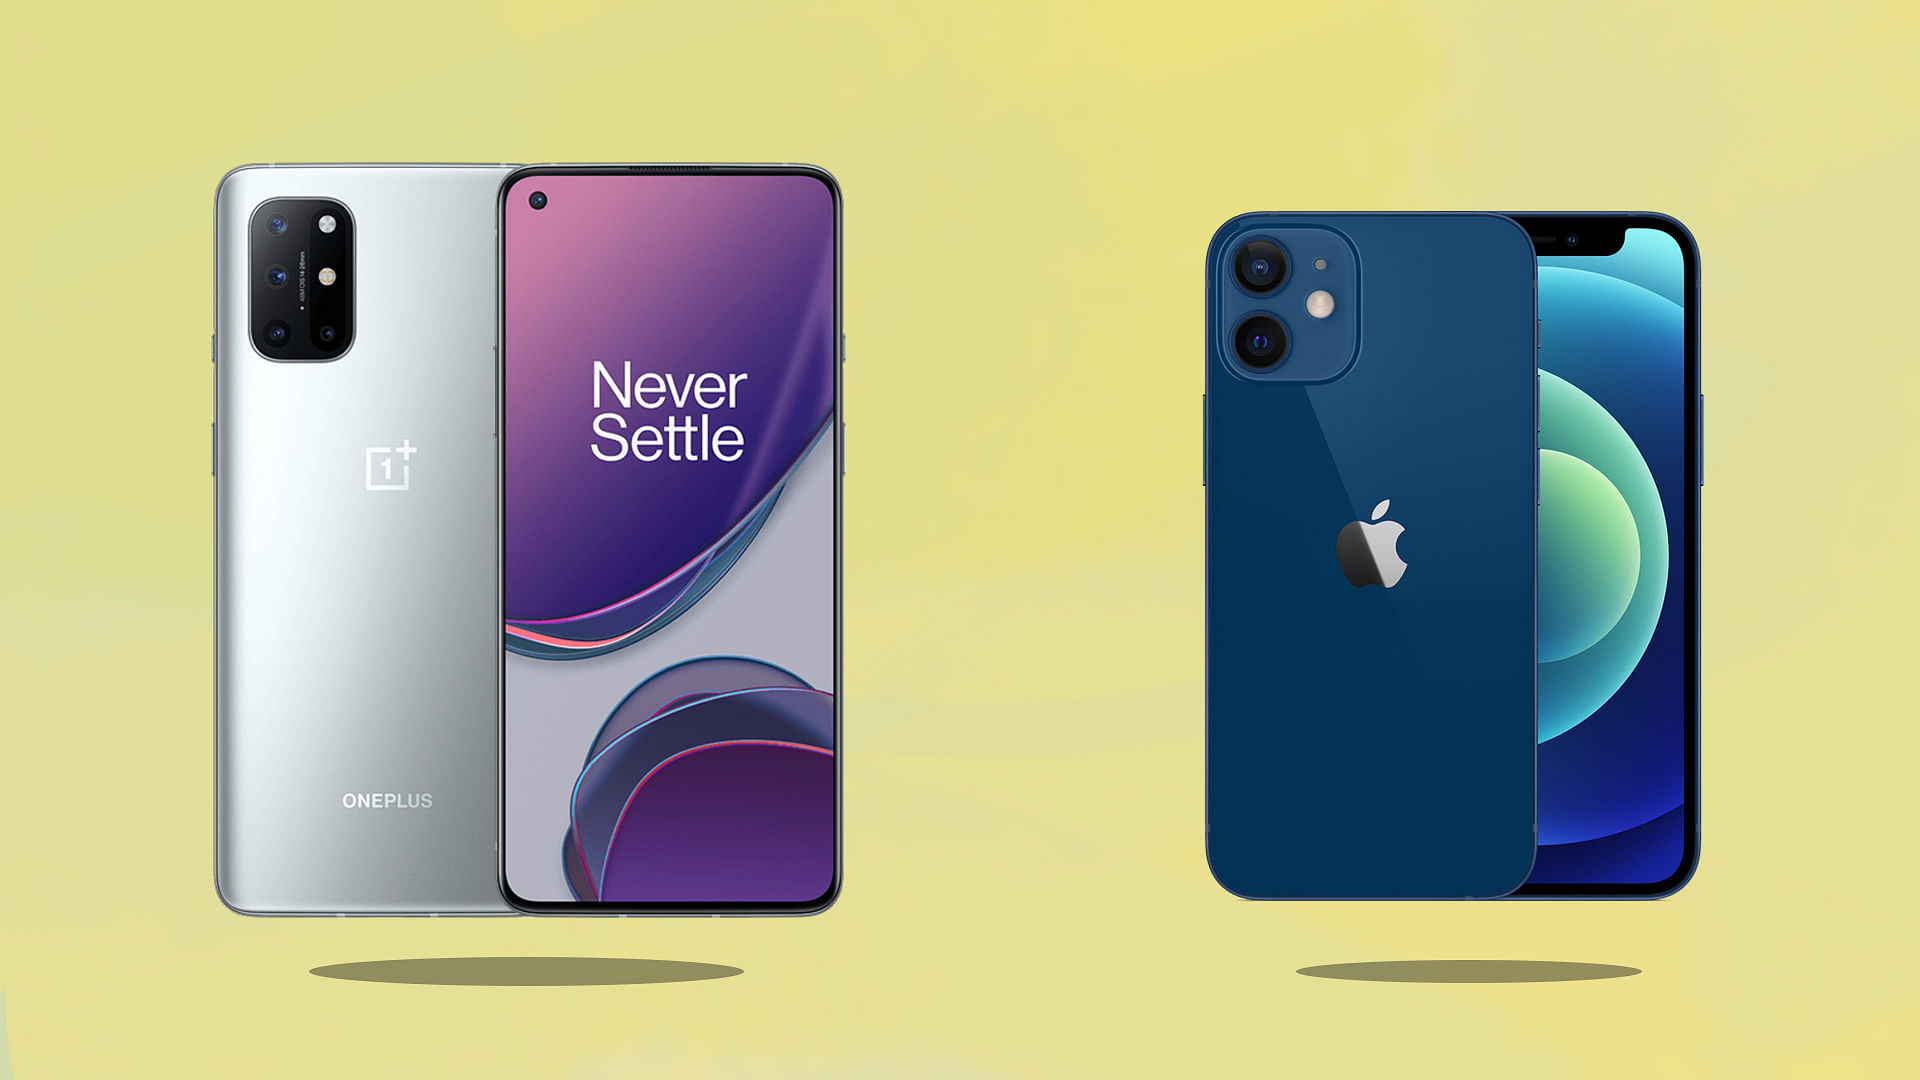 Iphone 12 Mini Vs Oneplus 8t Comparison Specifications Images Camera Battery More